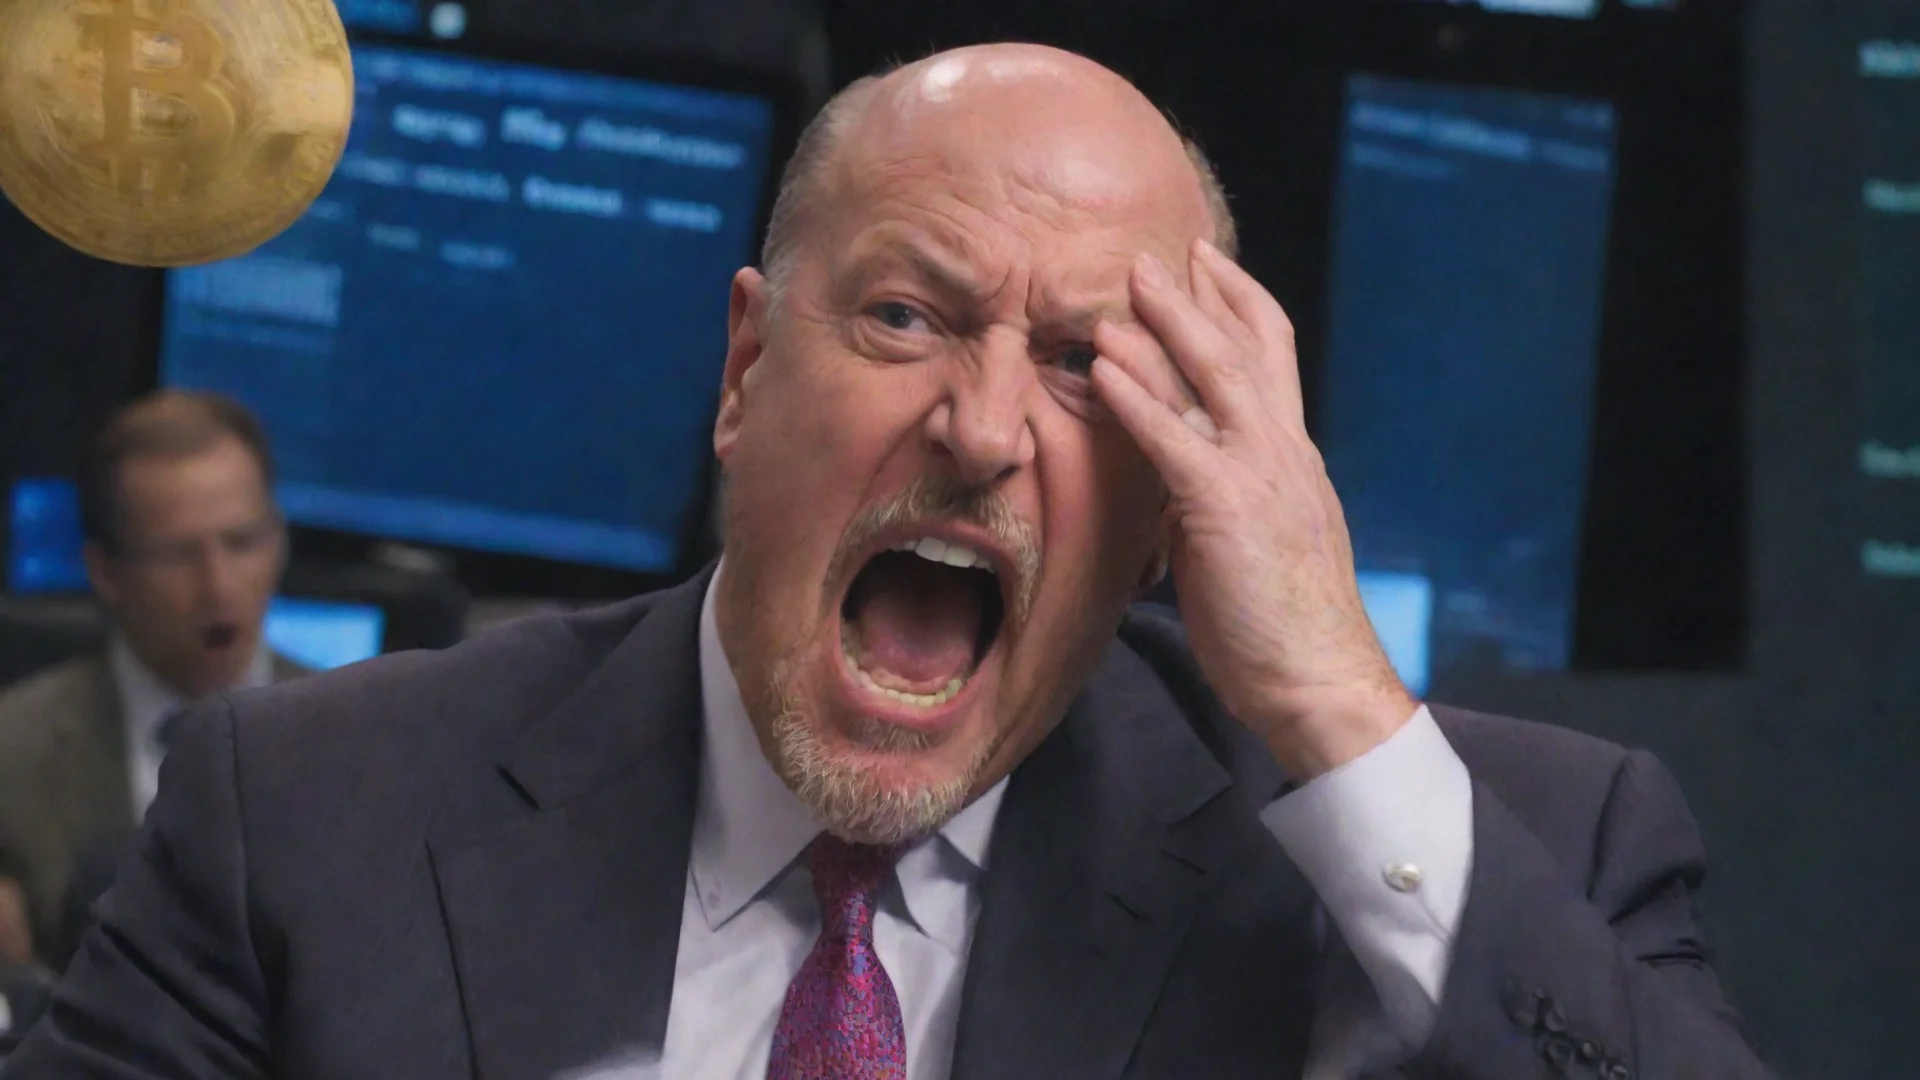 aiartstation art jim cramer screaming at bitcoin confident engaging wow 3 wide